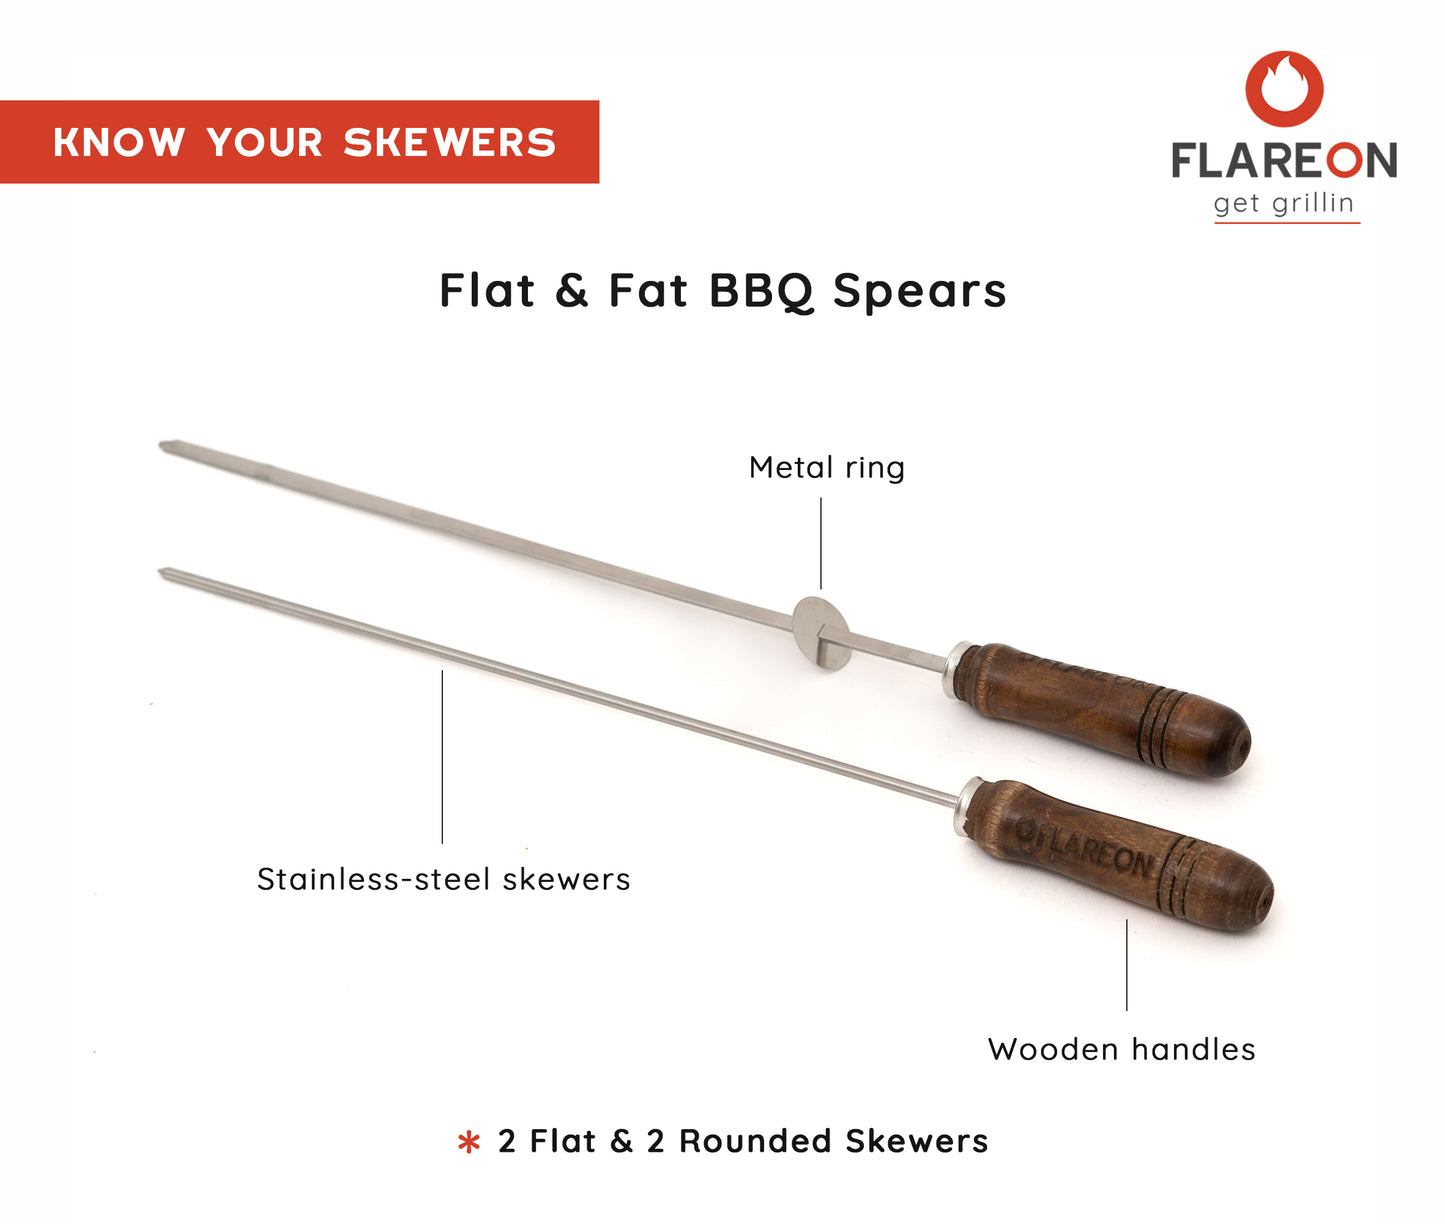 FlareOn's Flat and Fat BBQ Spears- Know Your Skewers